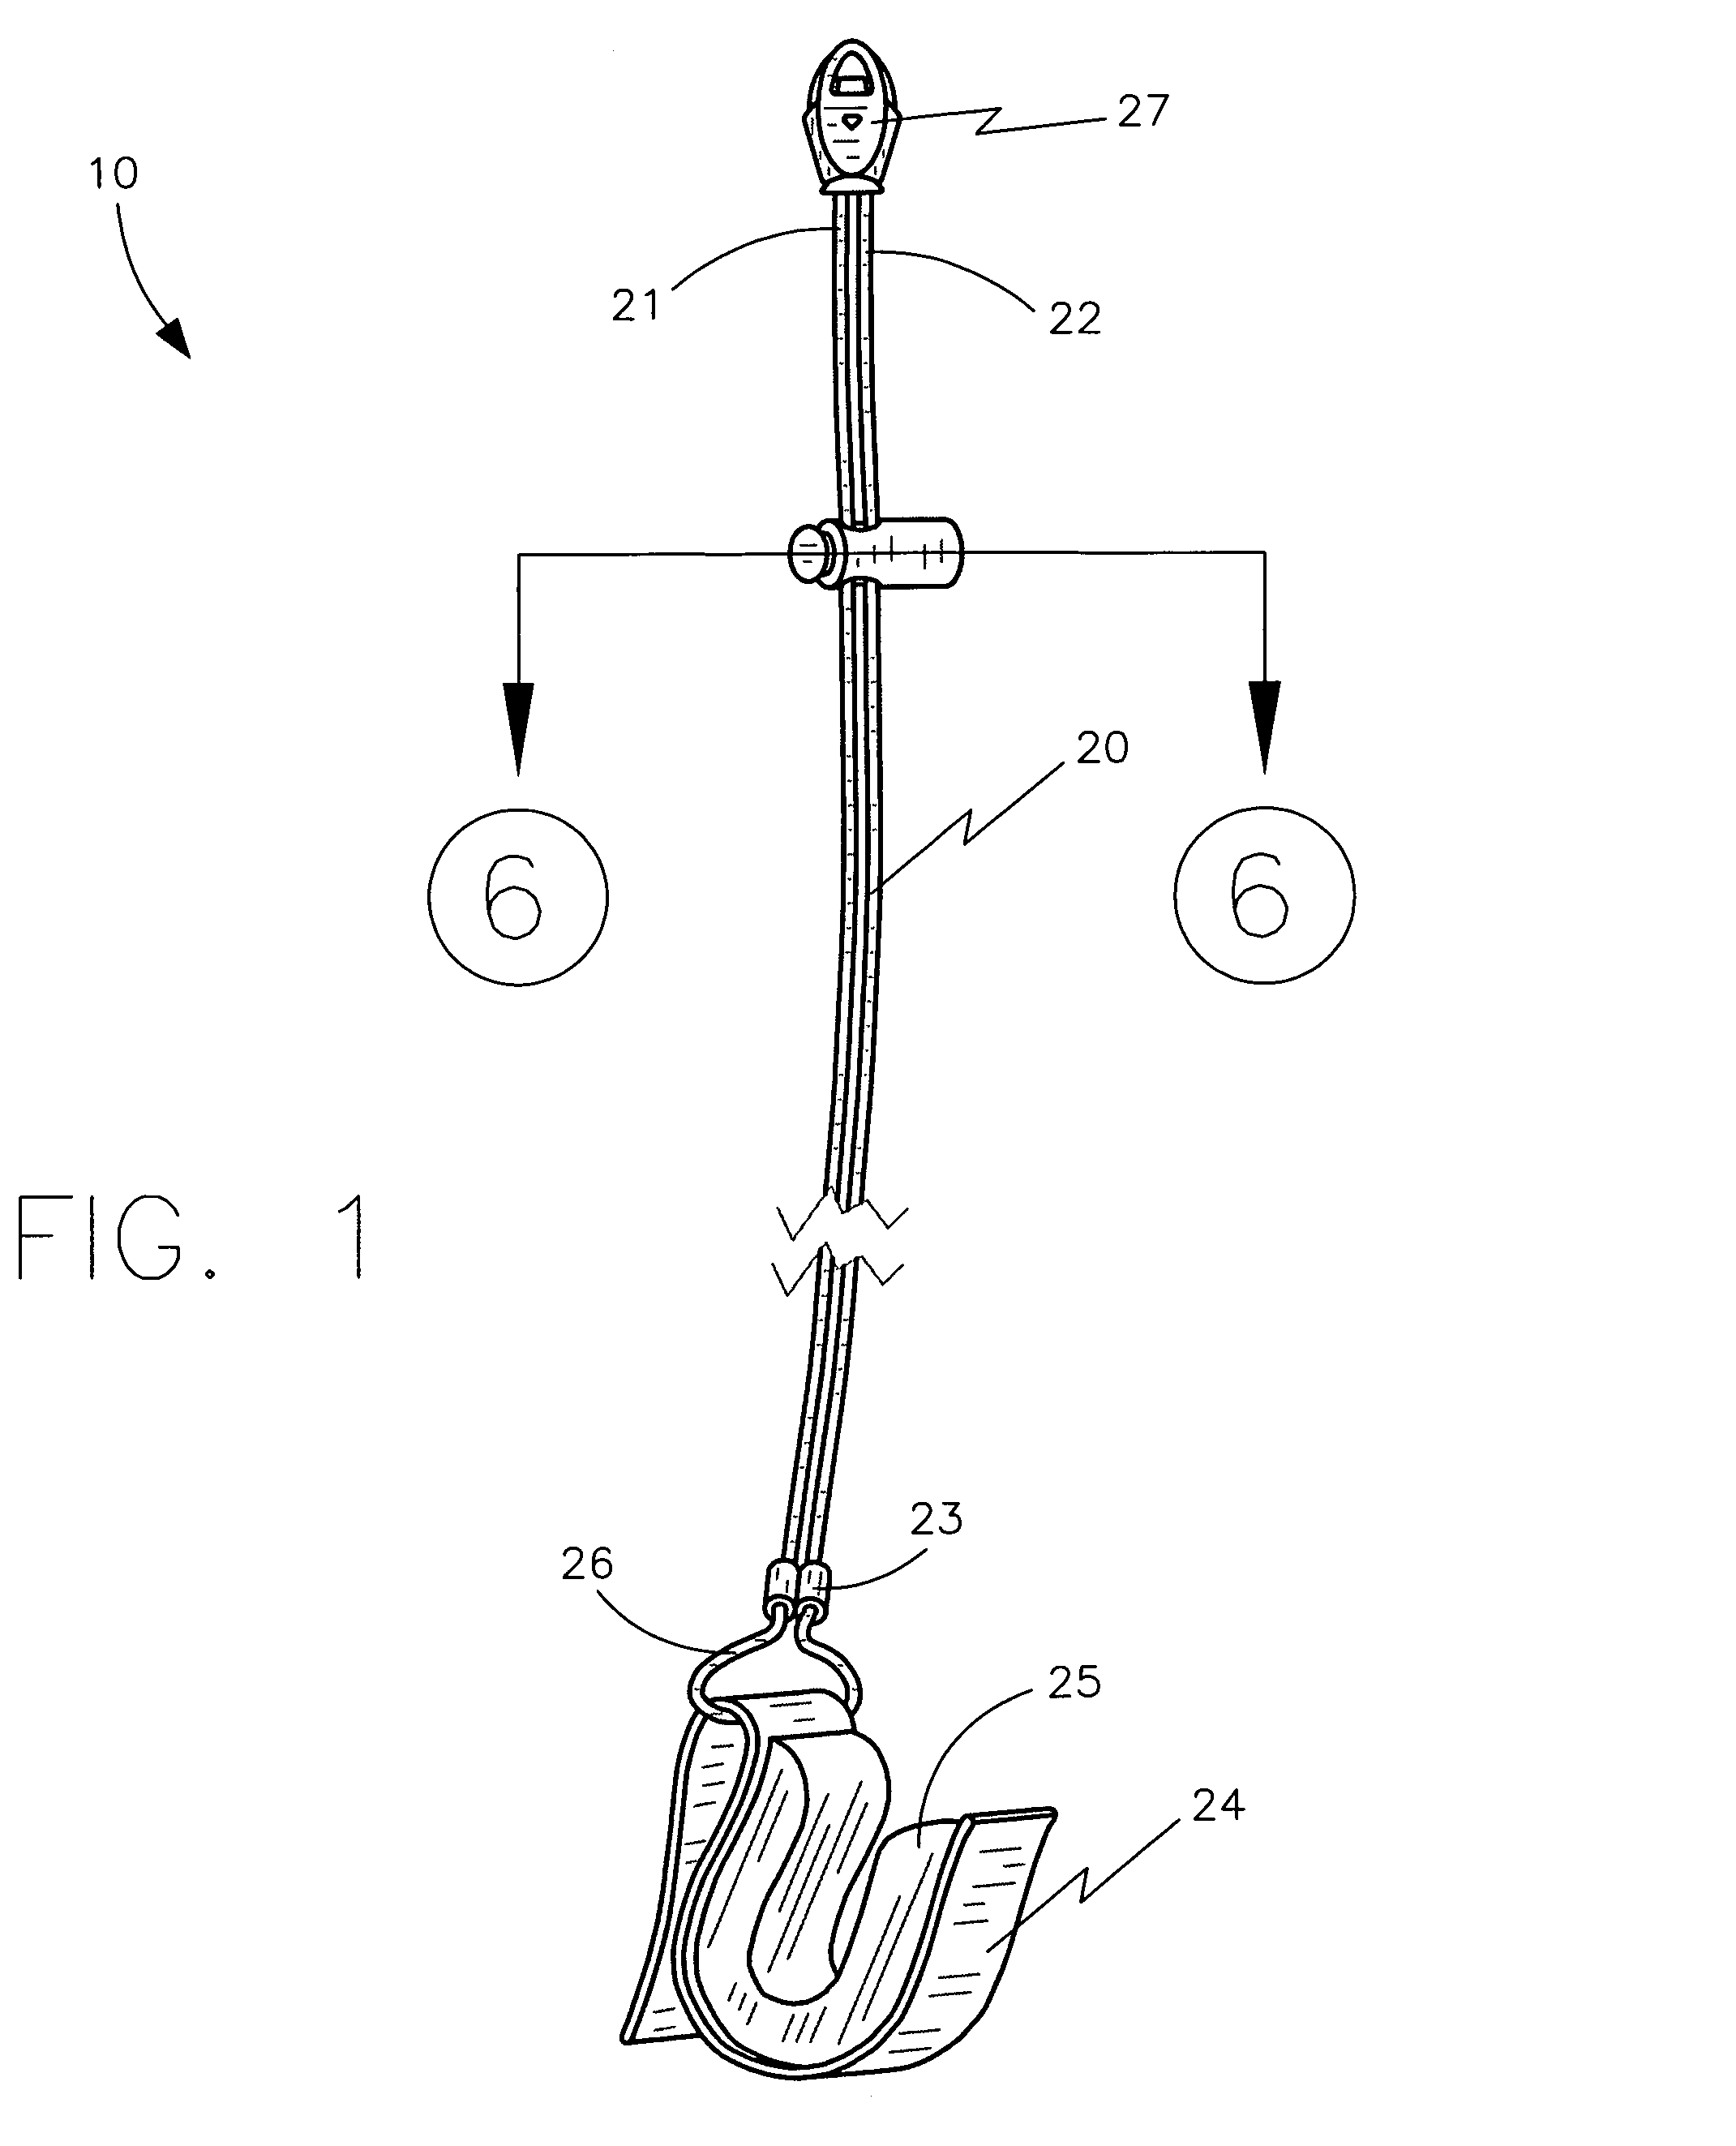 Portable fishing pole and binoculars support apparatus and associated method